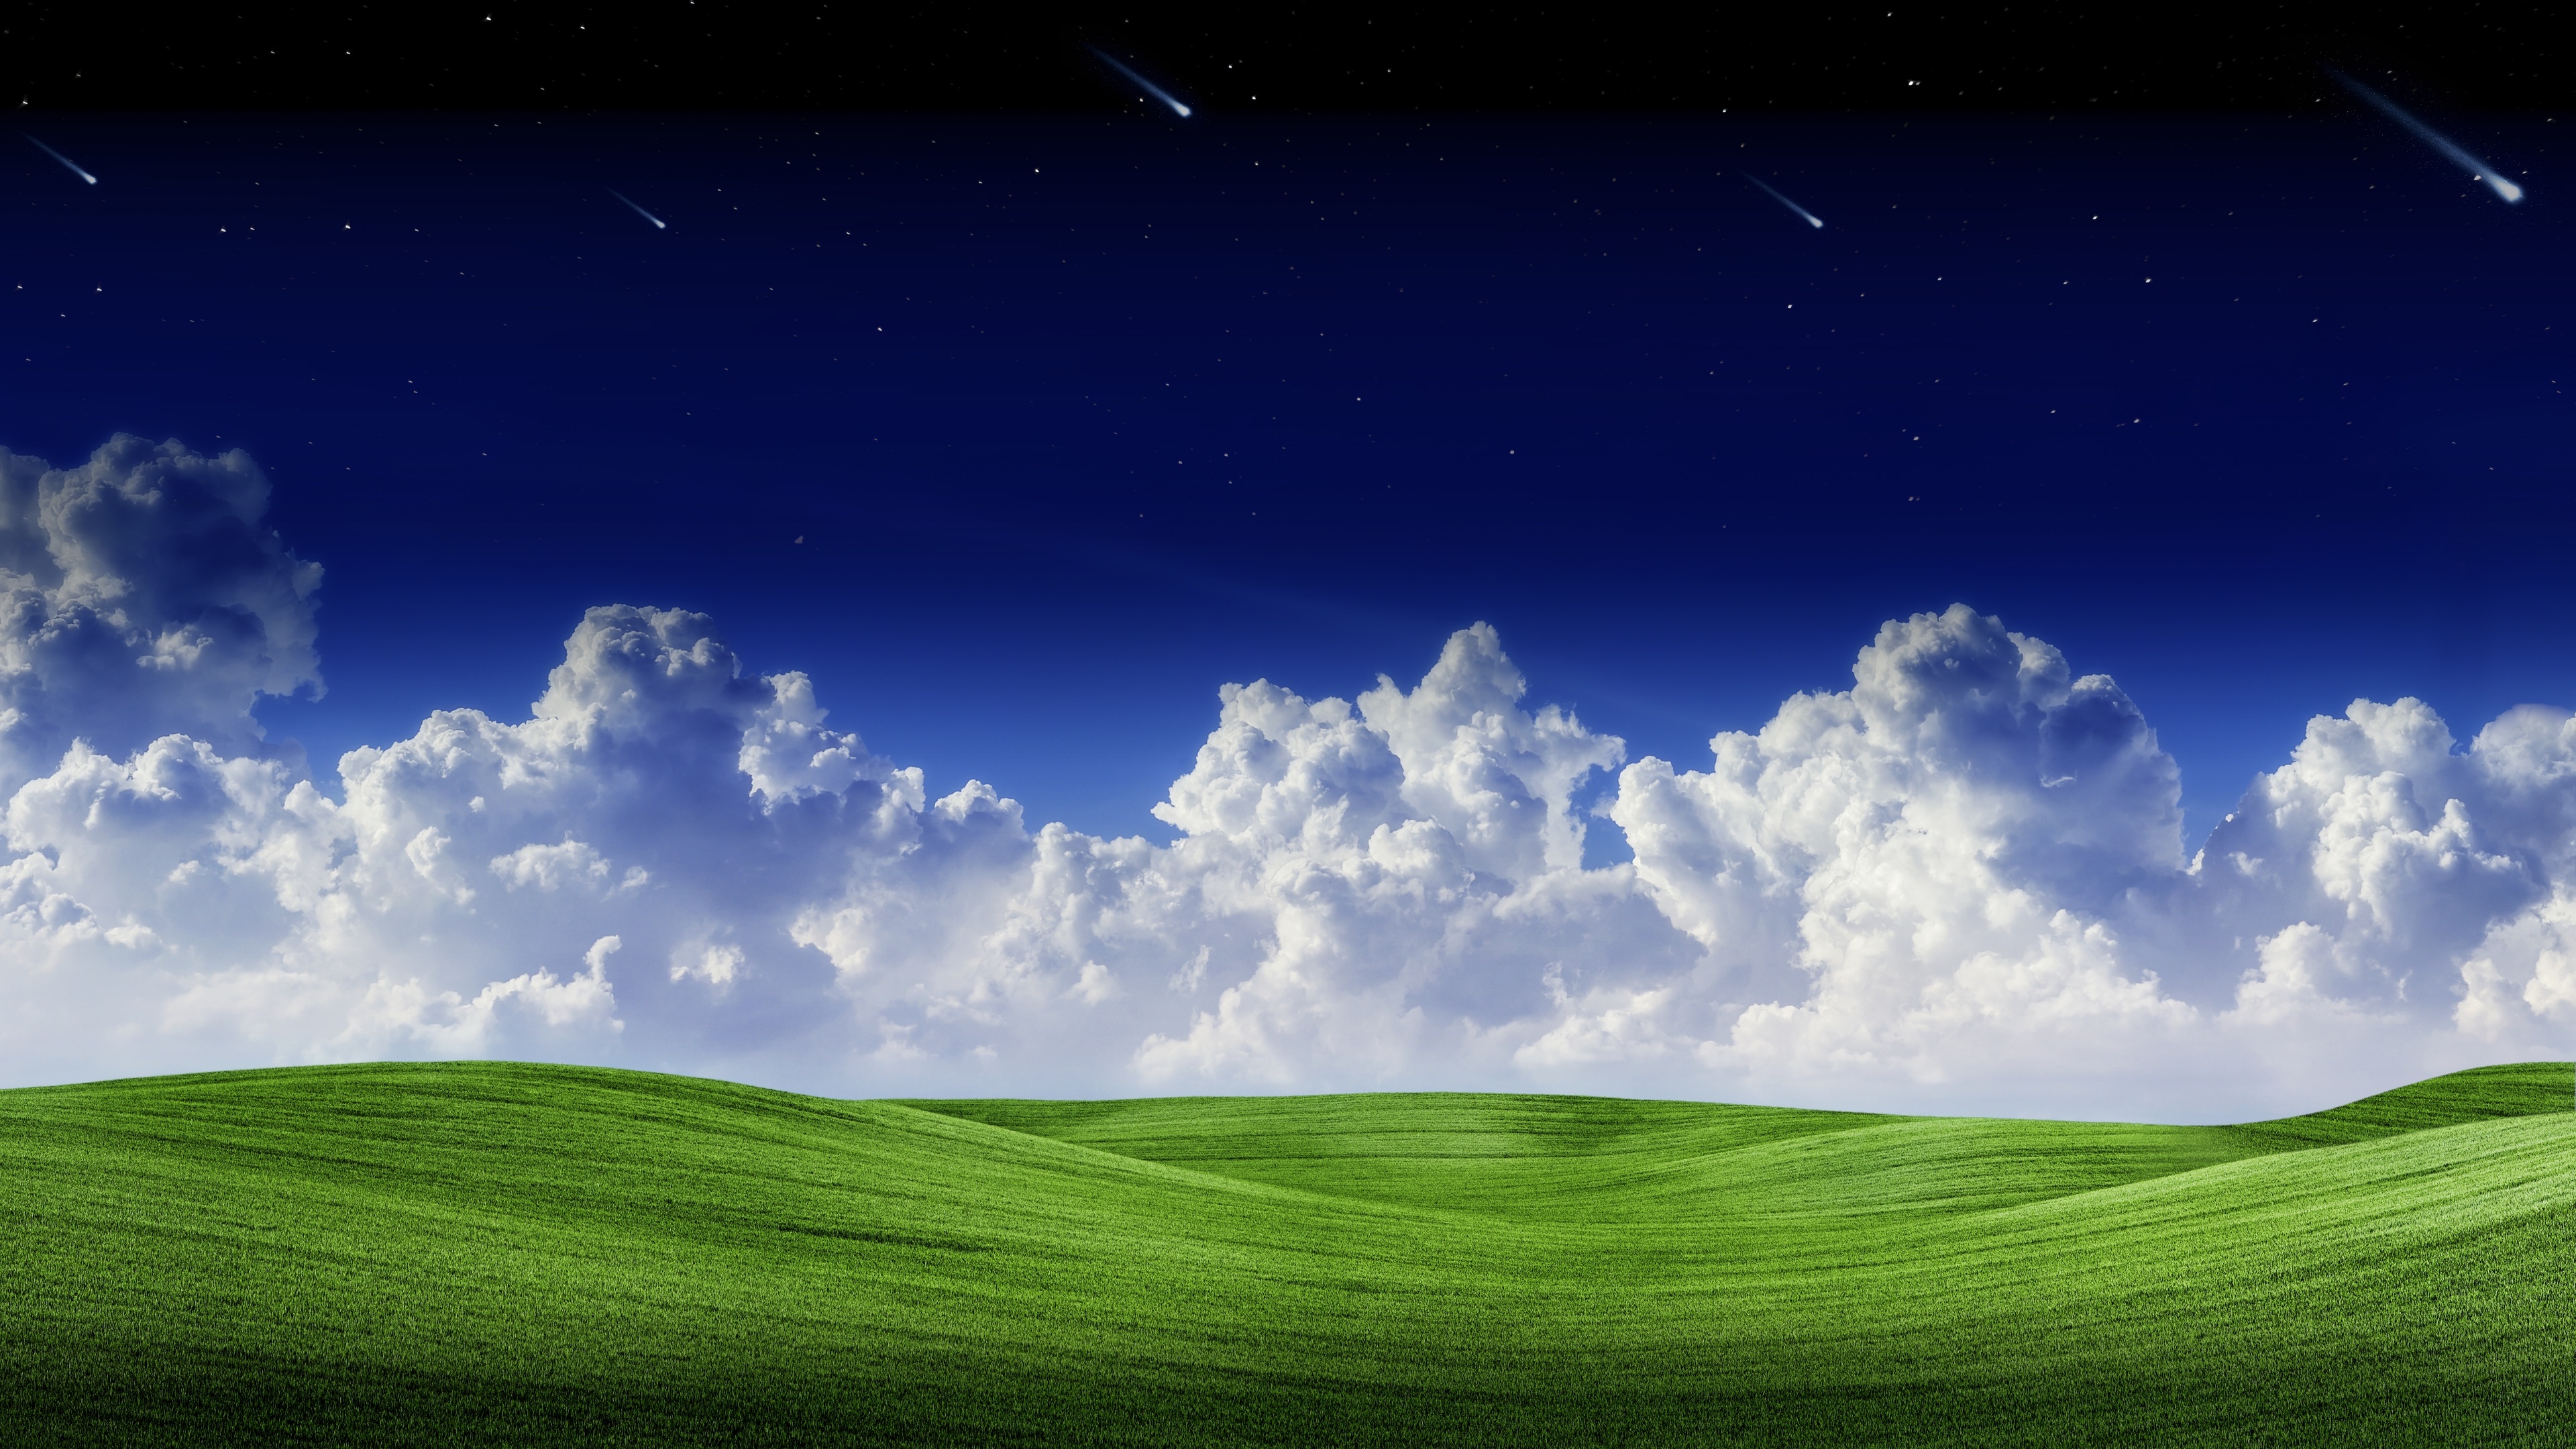 Grass and Sky: Landscape, Clouds, Green hills, Starry sky, Falling stars, Nature. 3840x2160 4K Background.